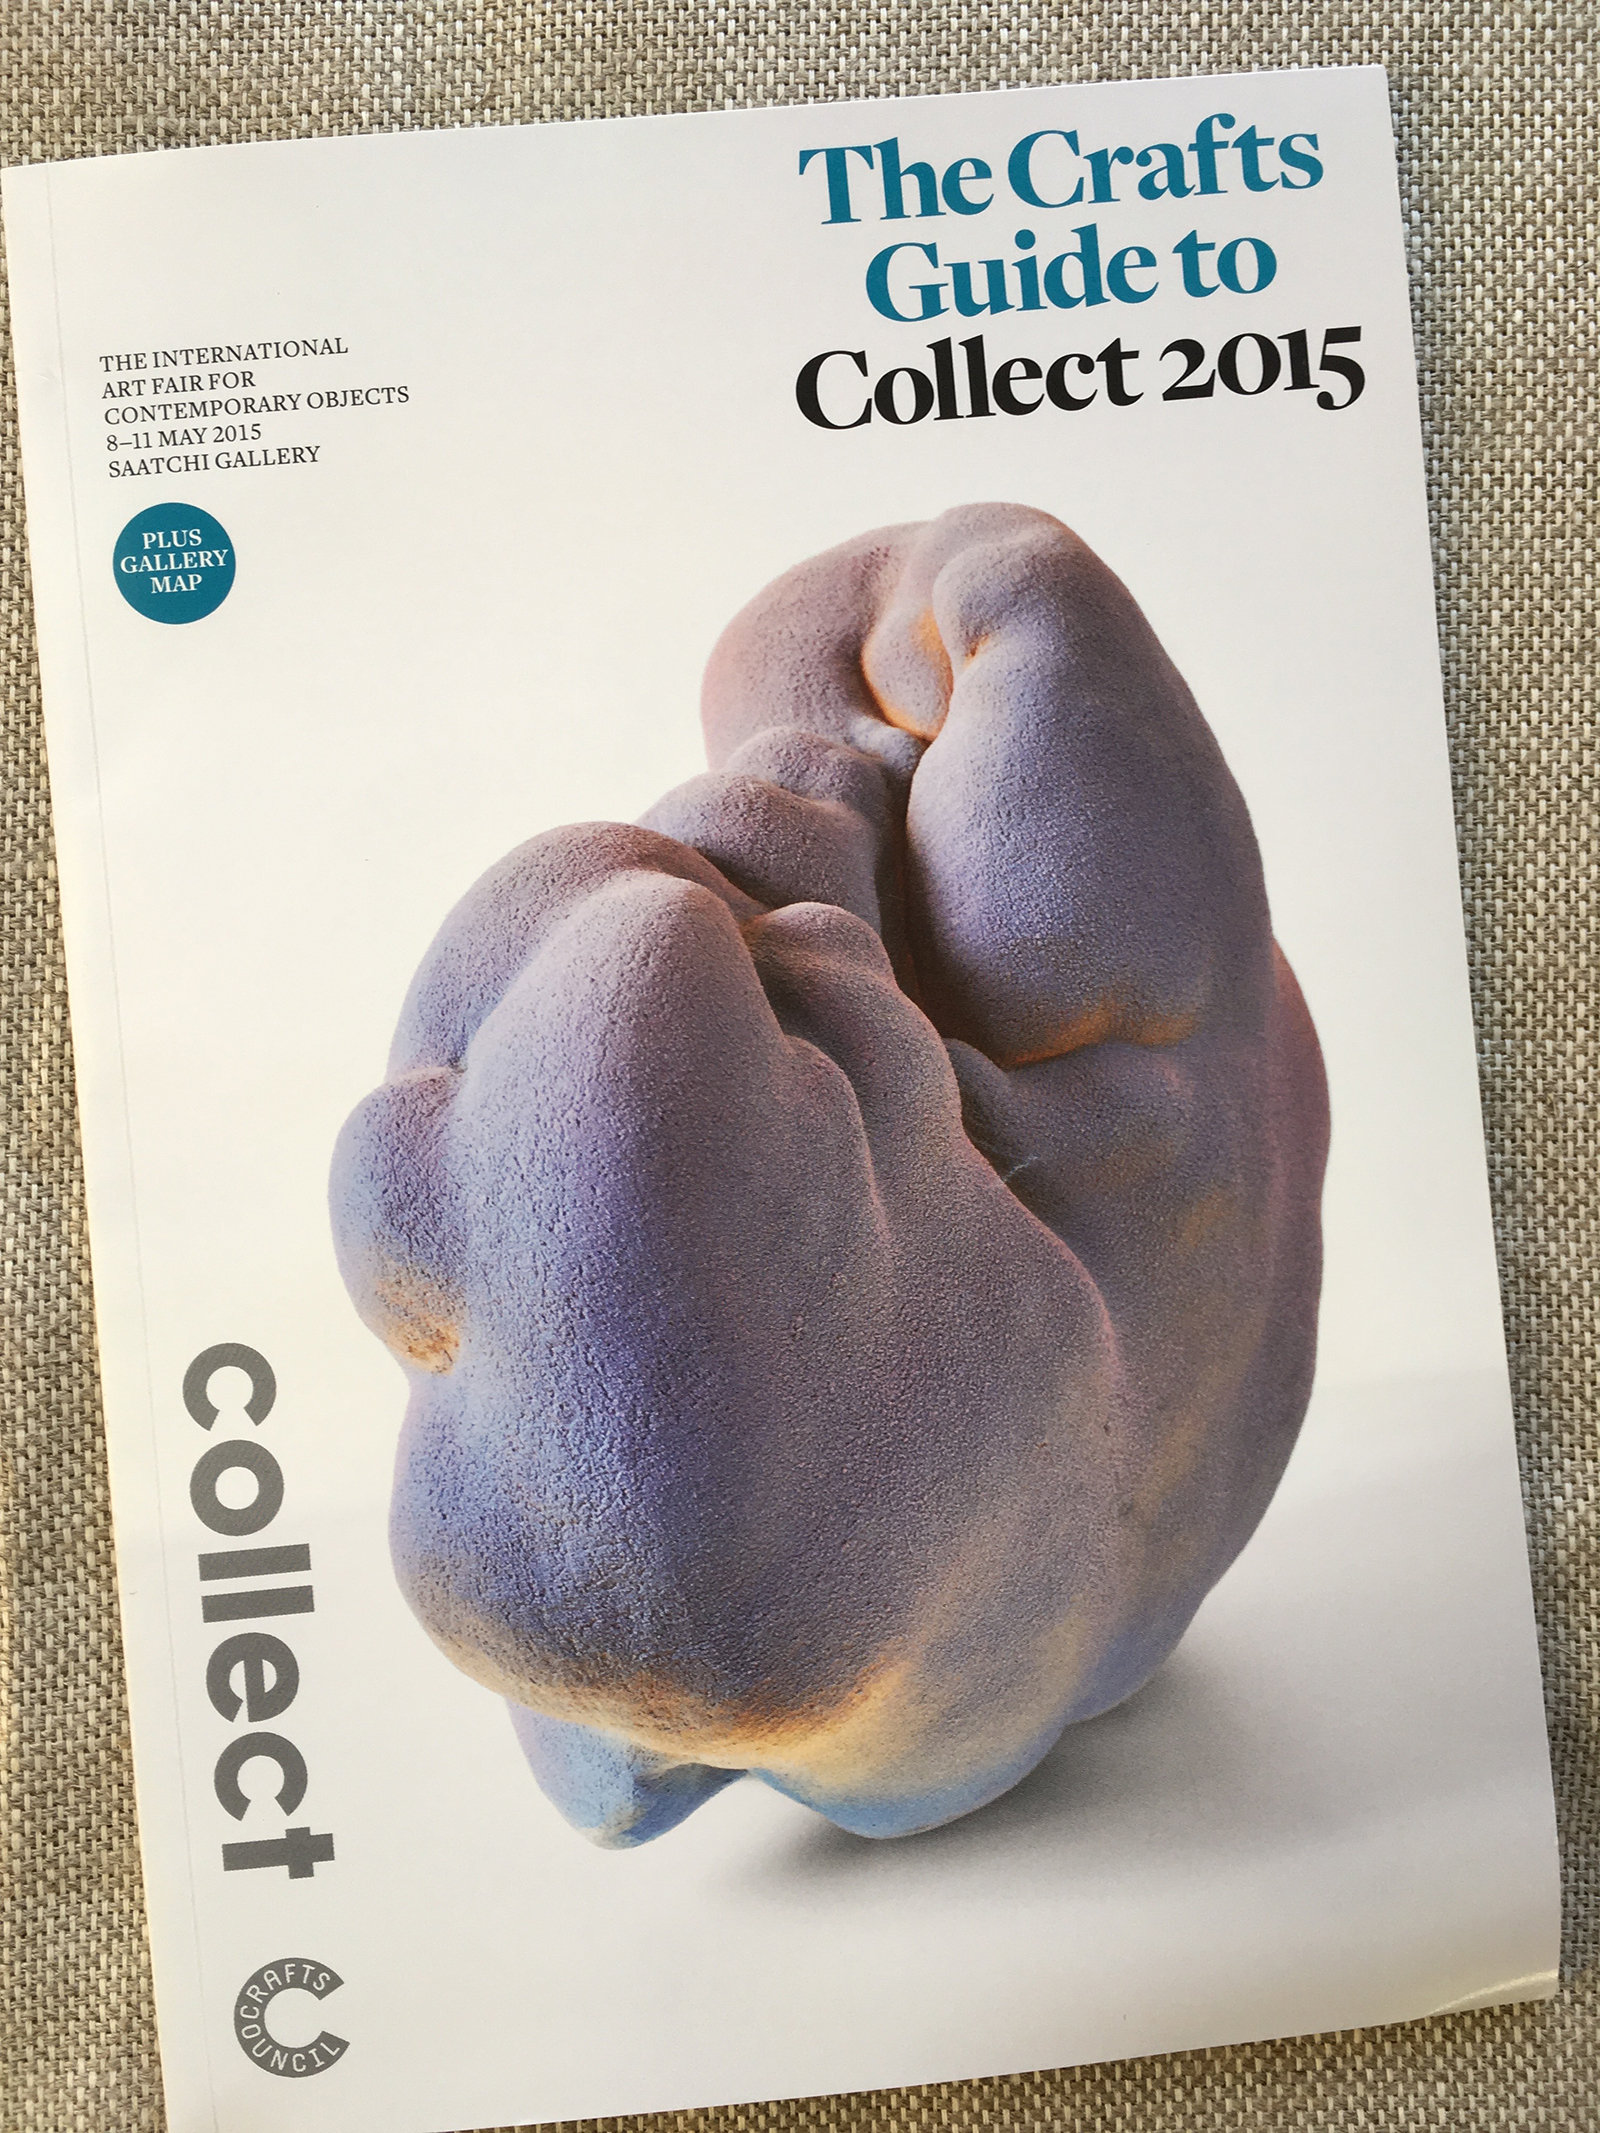 >> COLLECT Guide 2015